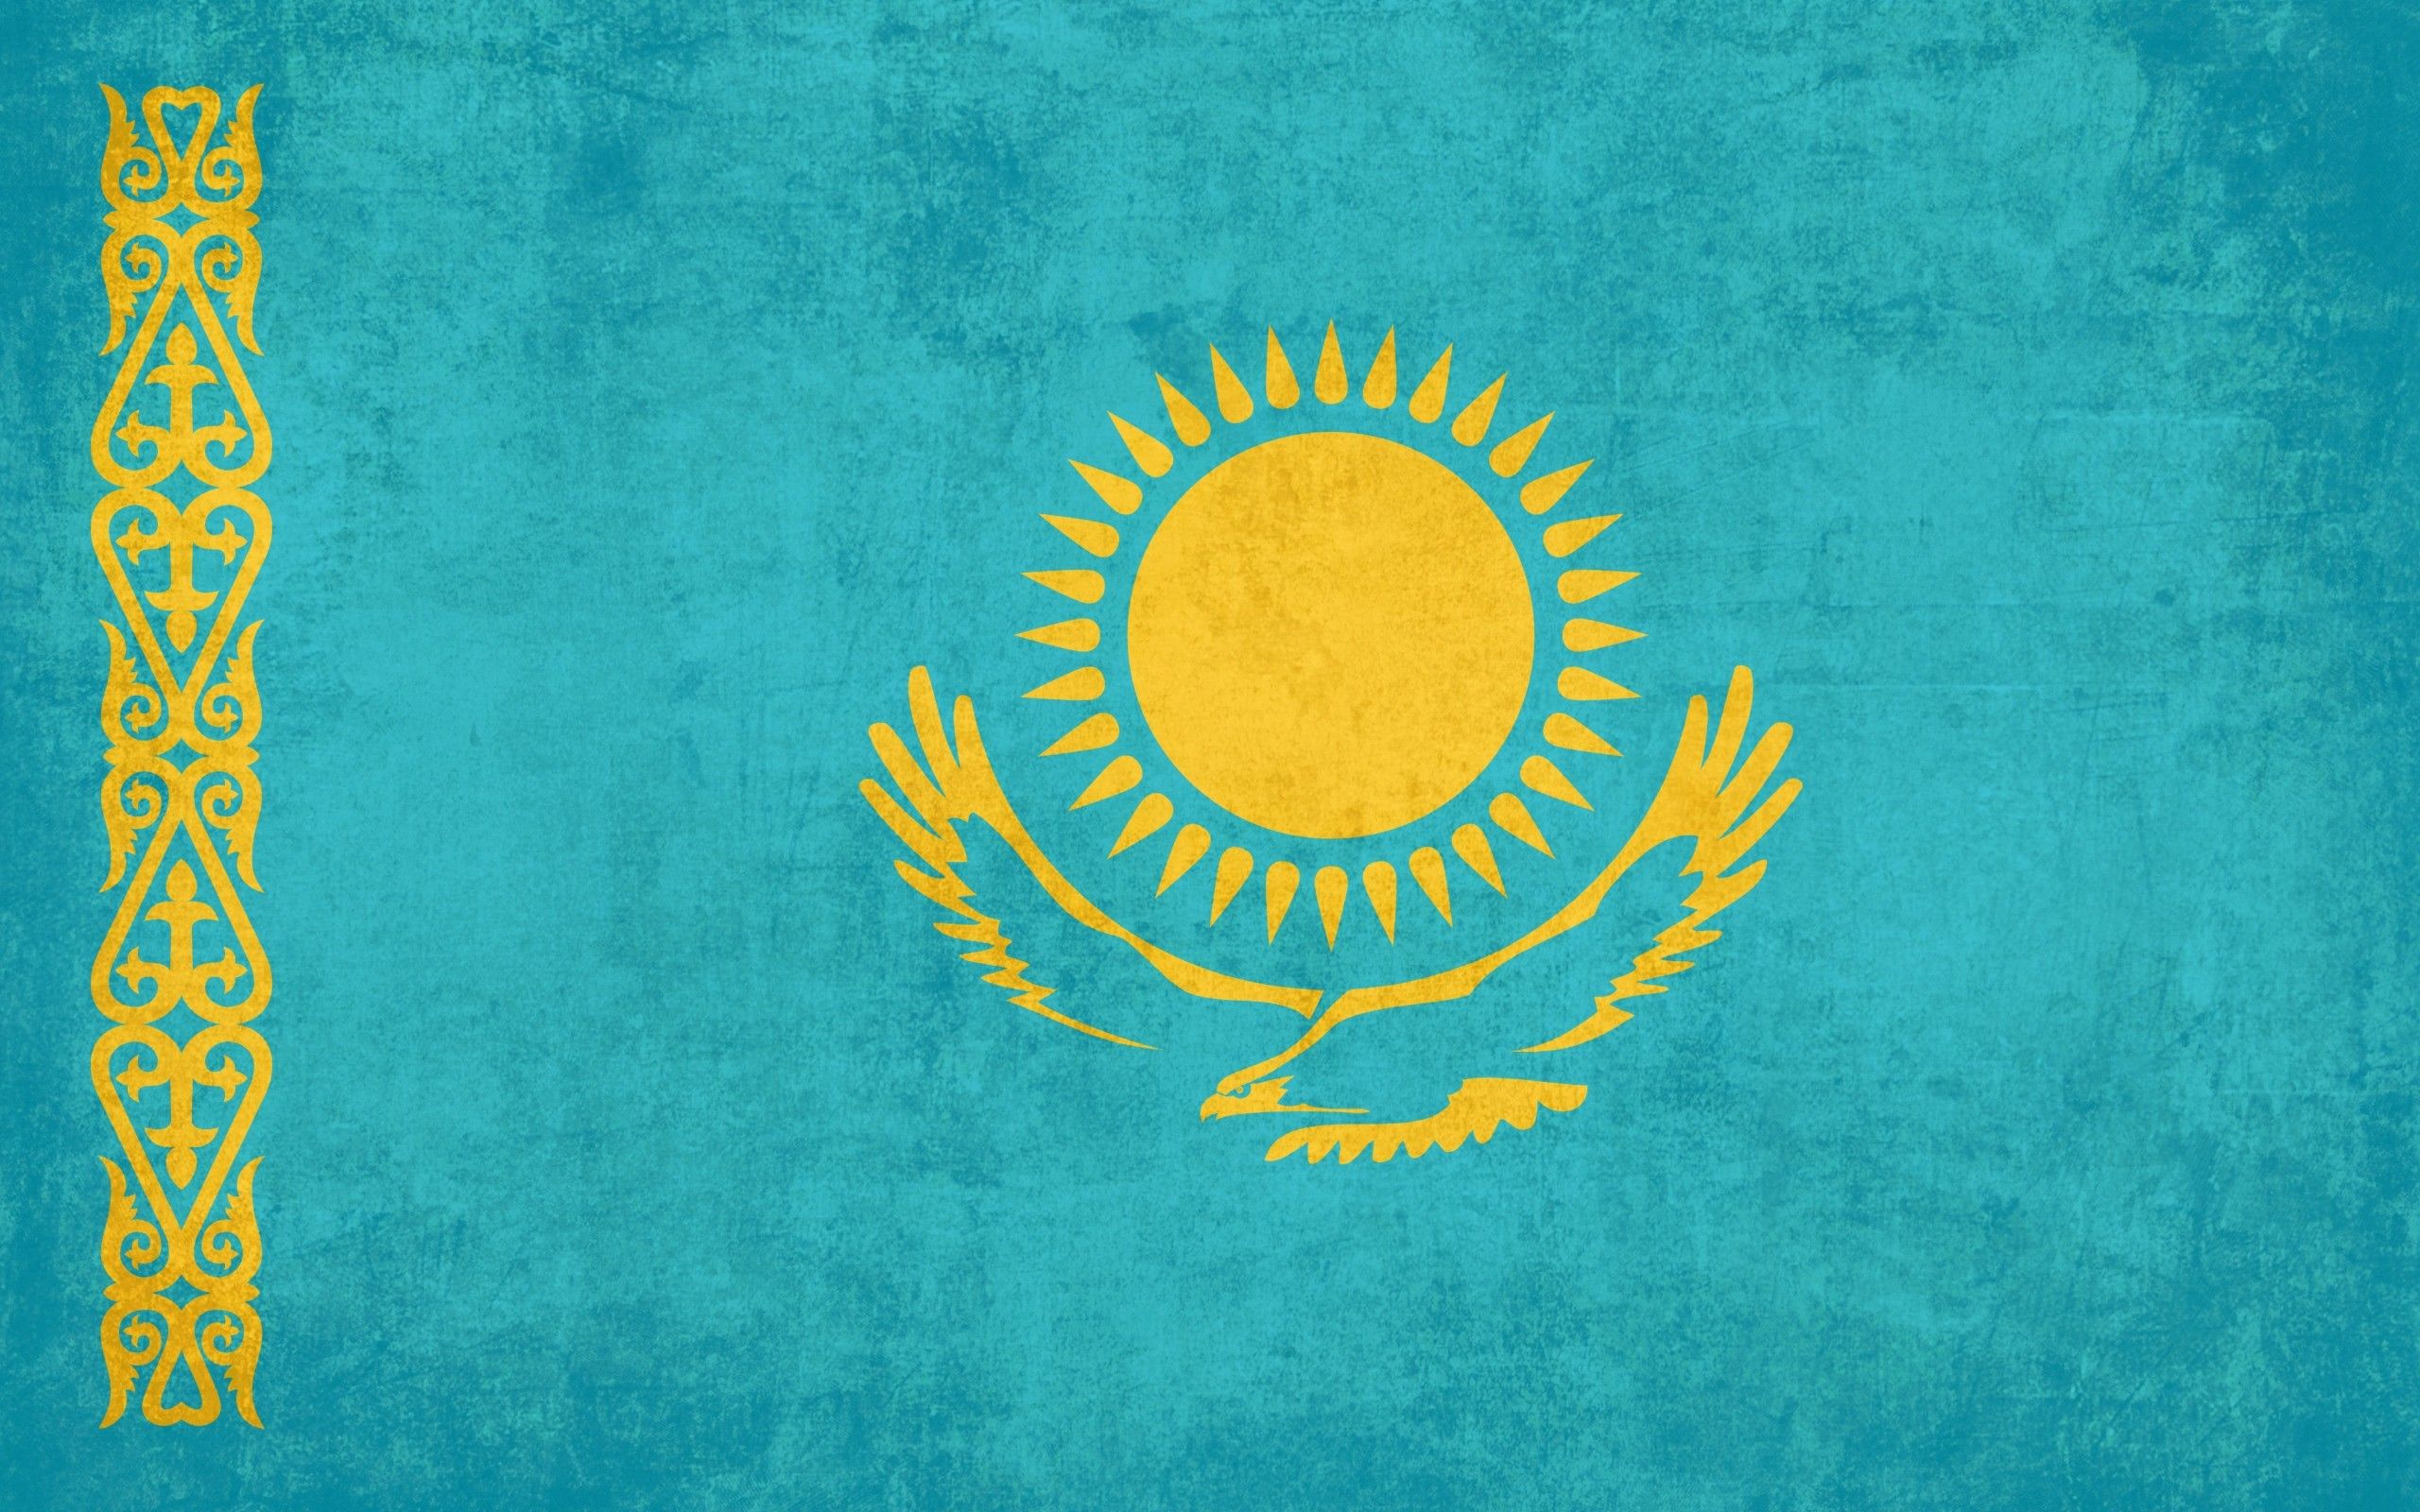 Northern Kazakhstan might become next target of Putin’s aggression - blogger